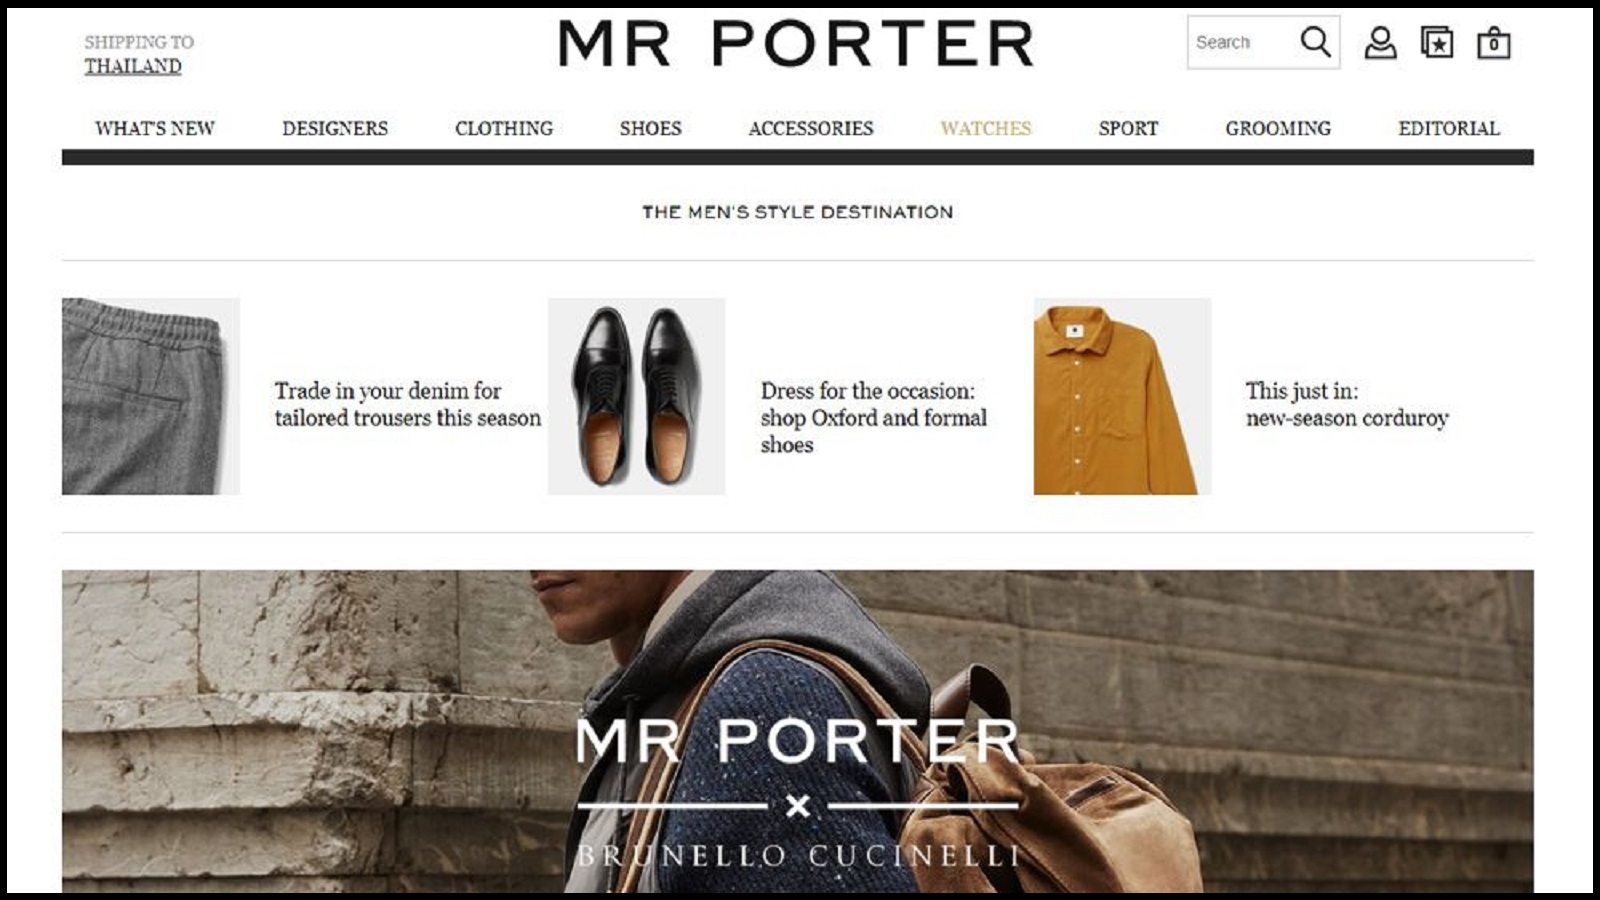 Mr Porter Review: Is It Worth the Price?